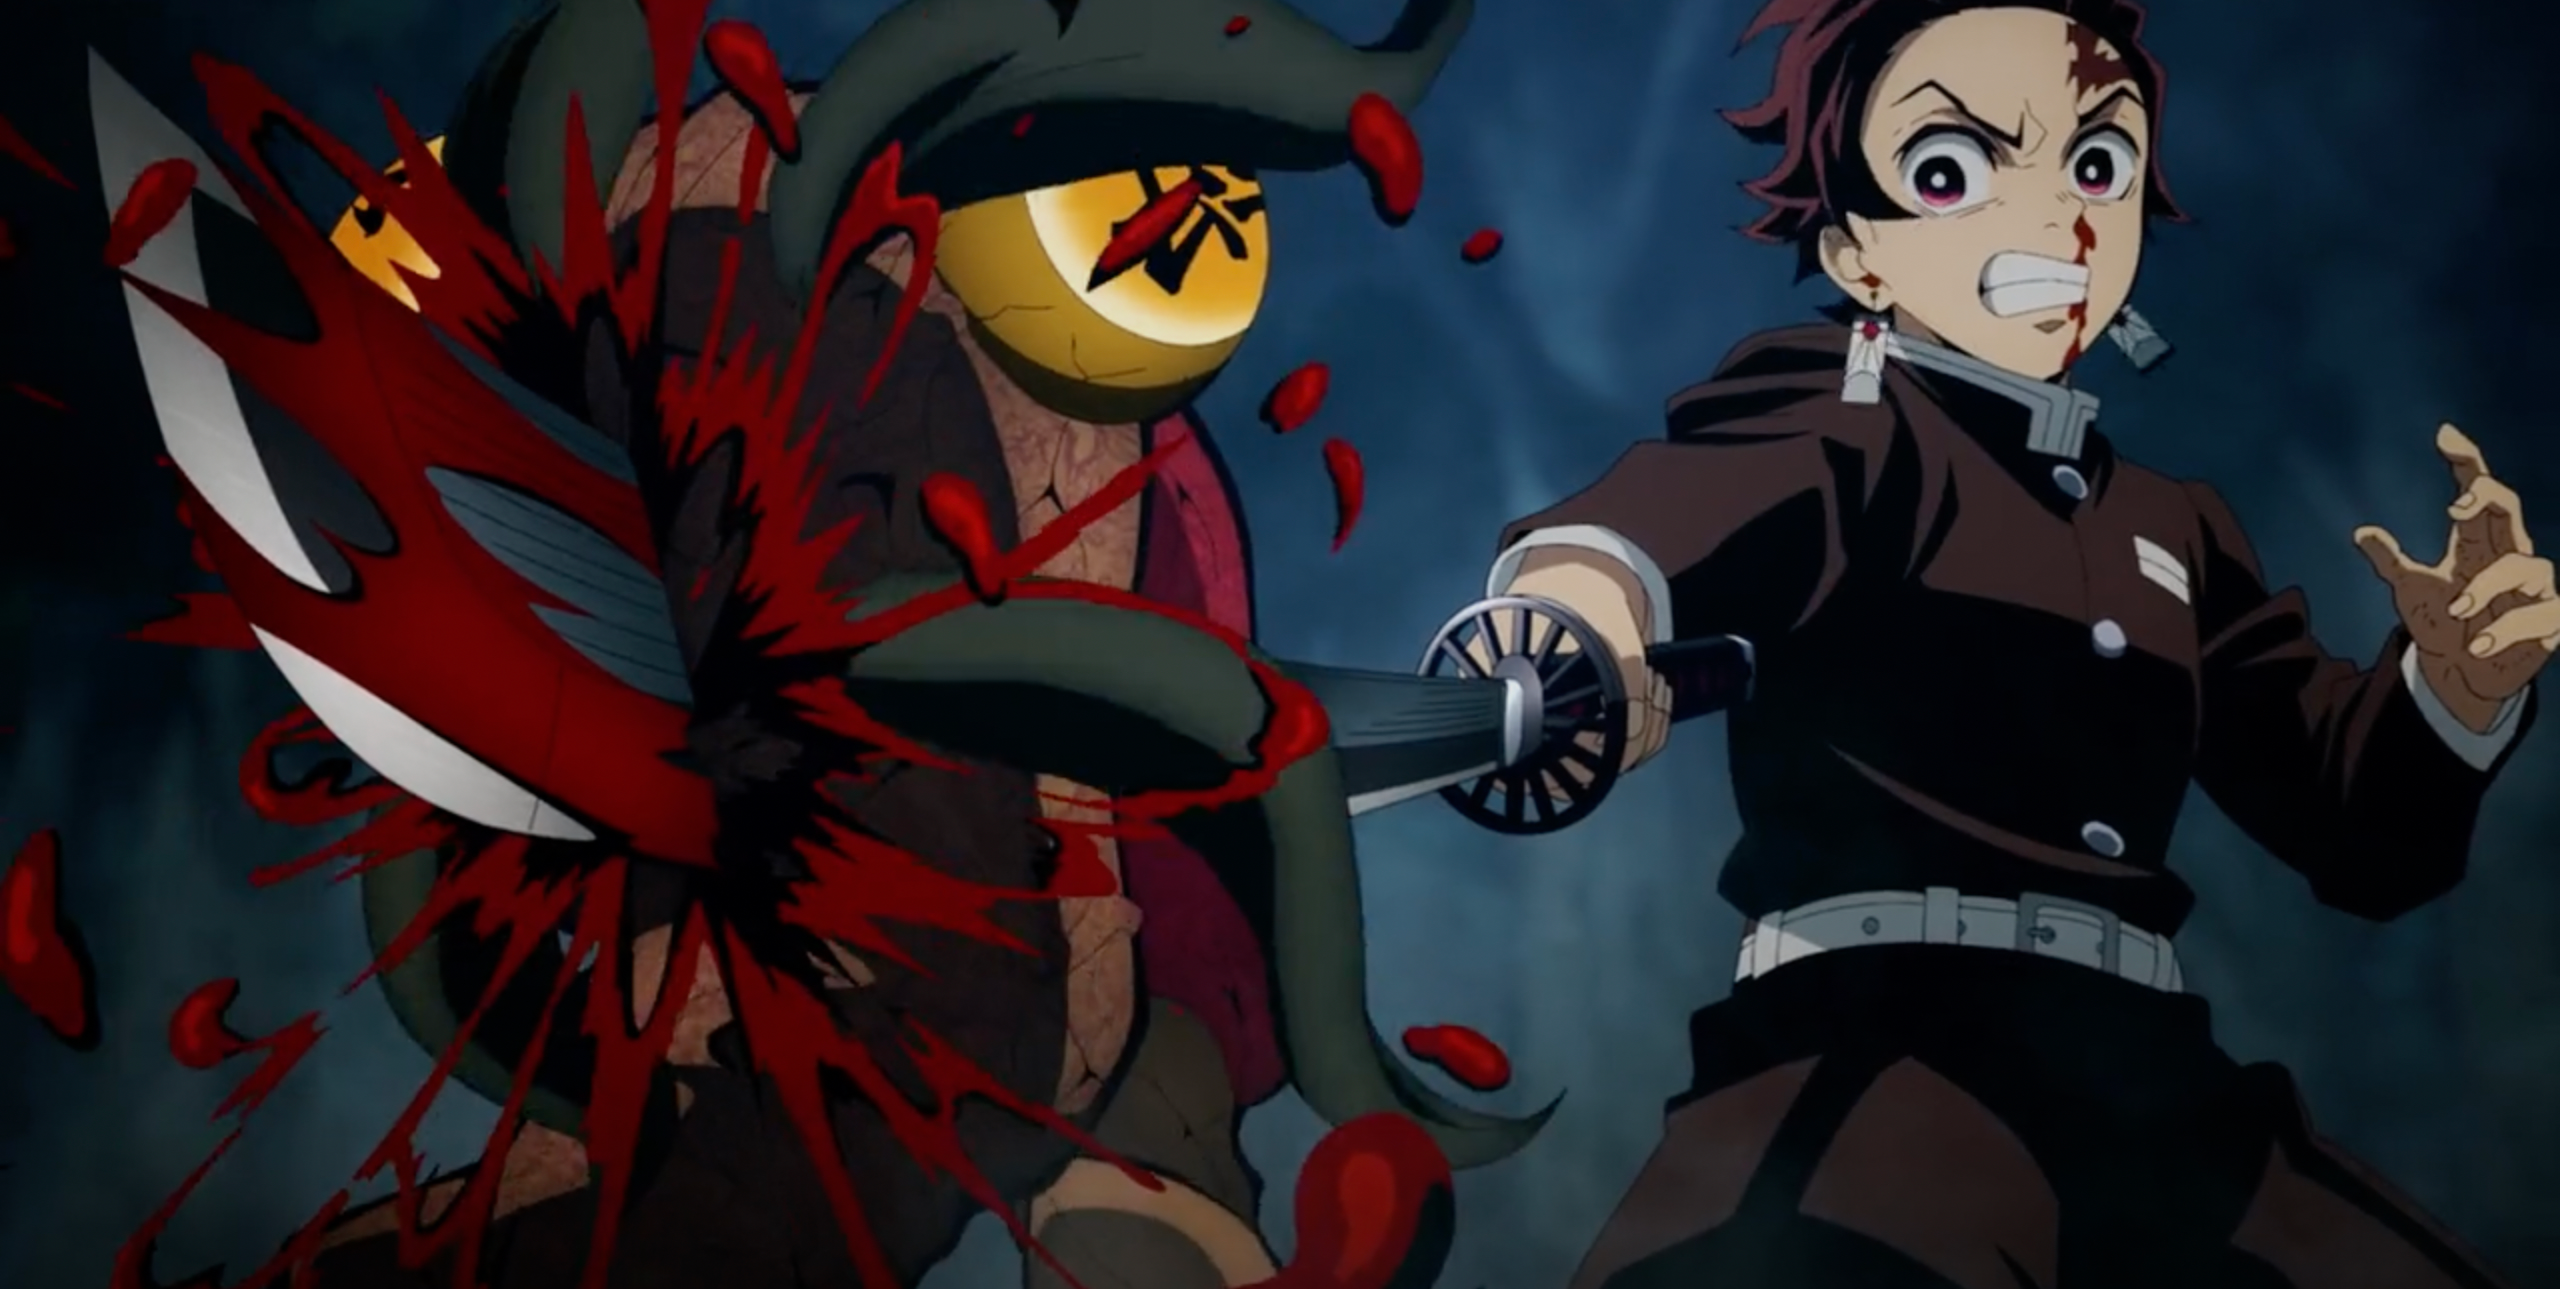 Demon Slayer Season 3 Episode 5 Watch Online, Release Date & Time, Preview, and More